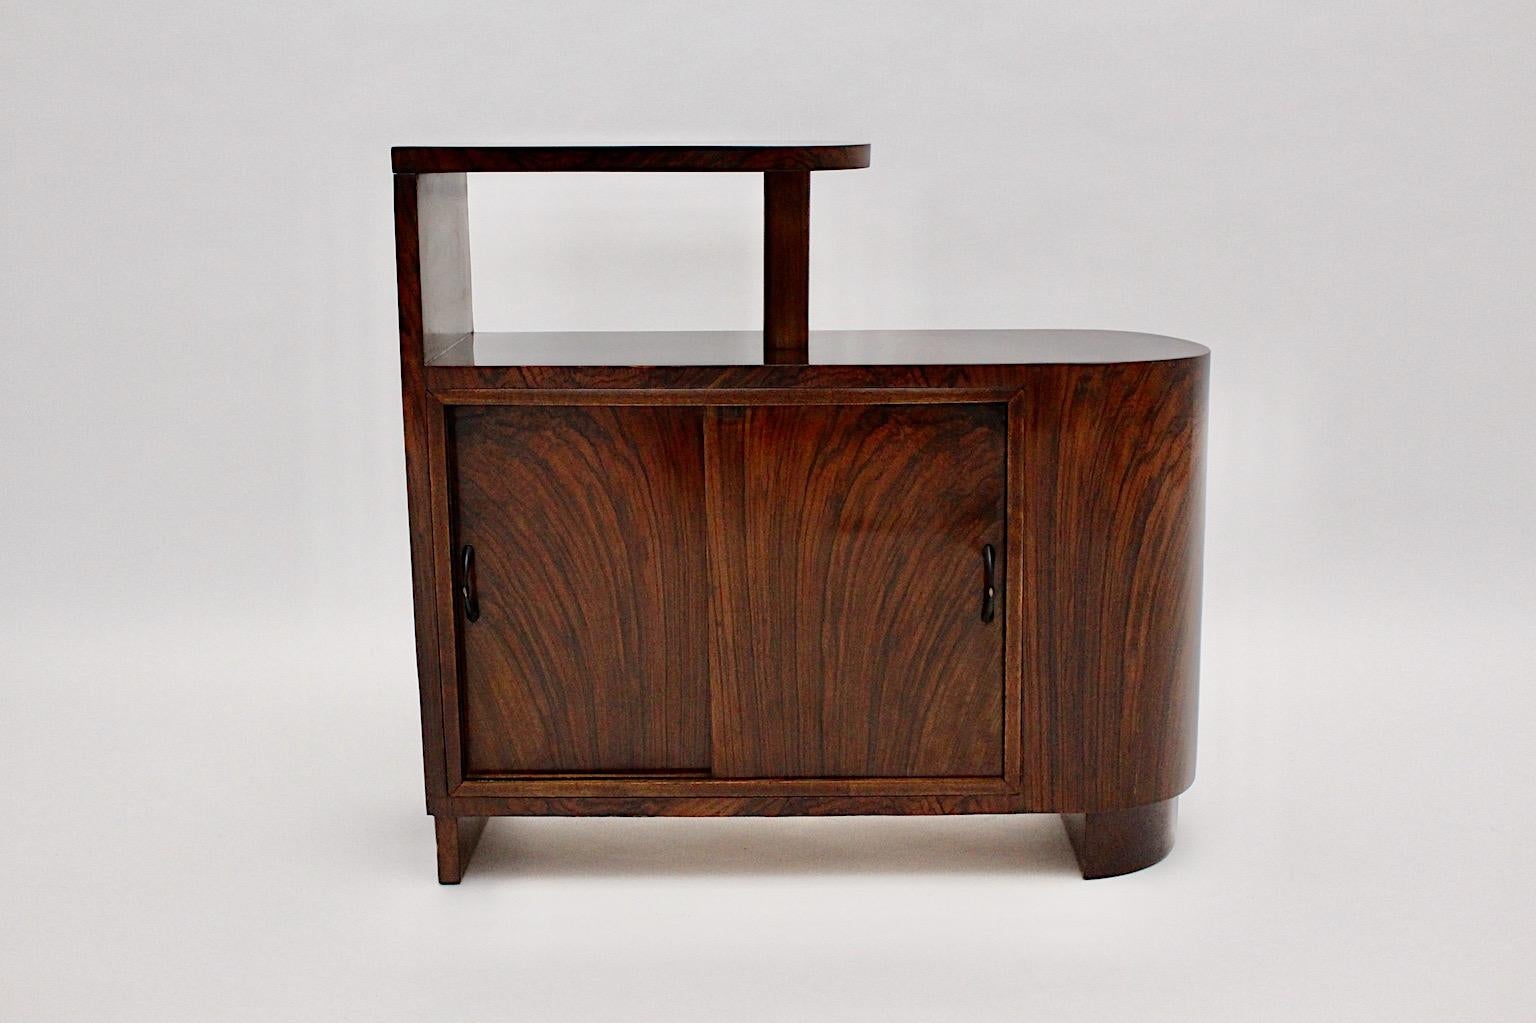 Art Deco vintage room divider or small chest from walnut circa 1930, Vienna.
A wonderful Art Deco vintage freestanding room divider or small chest from lively walnut veneer and spruce in smoothly chocolate brown color tone.
The surface is shellac